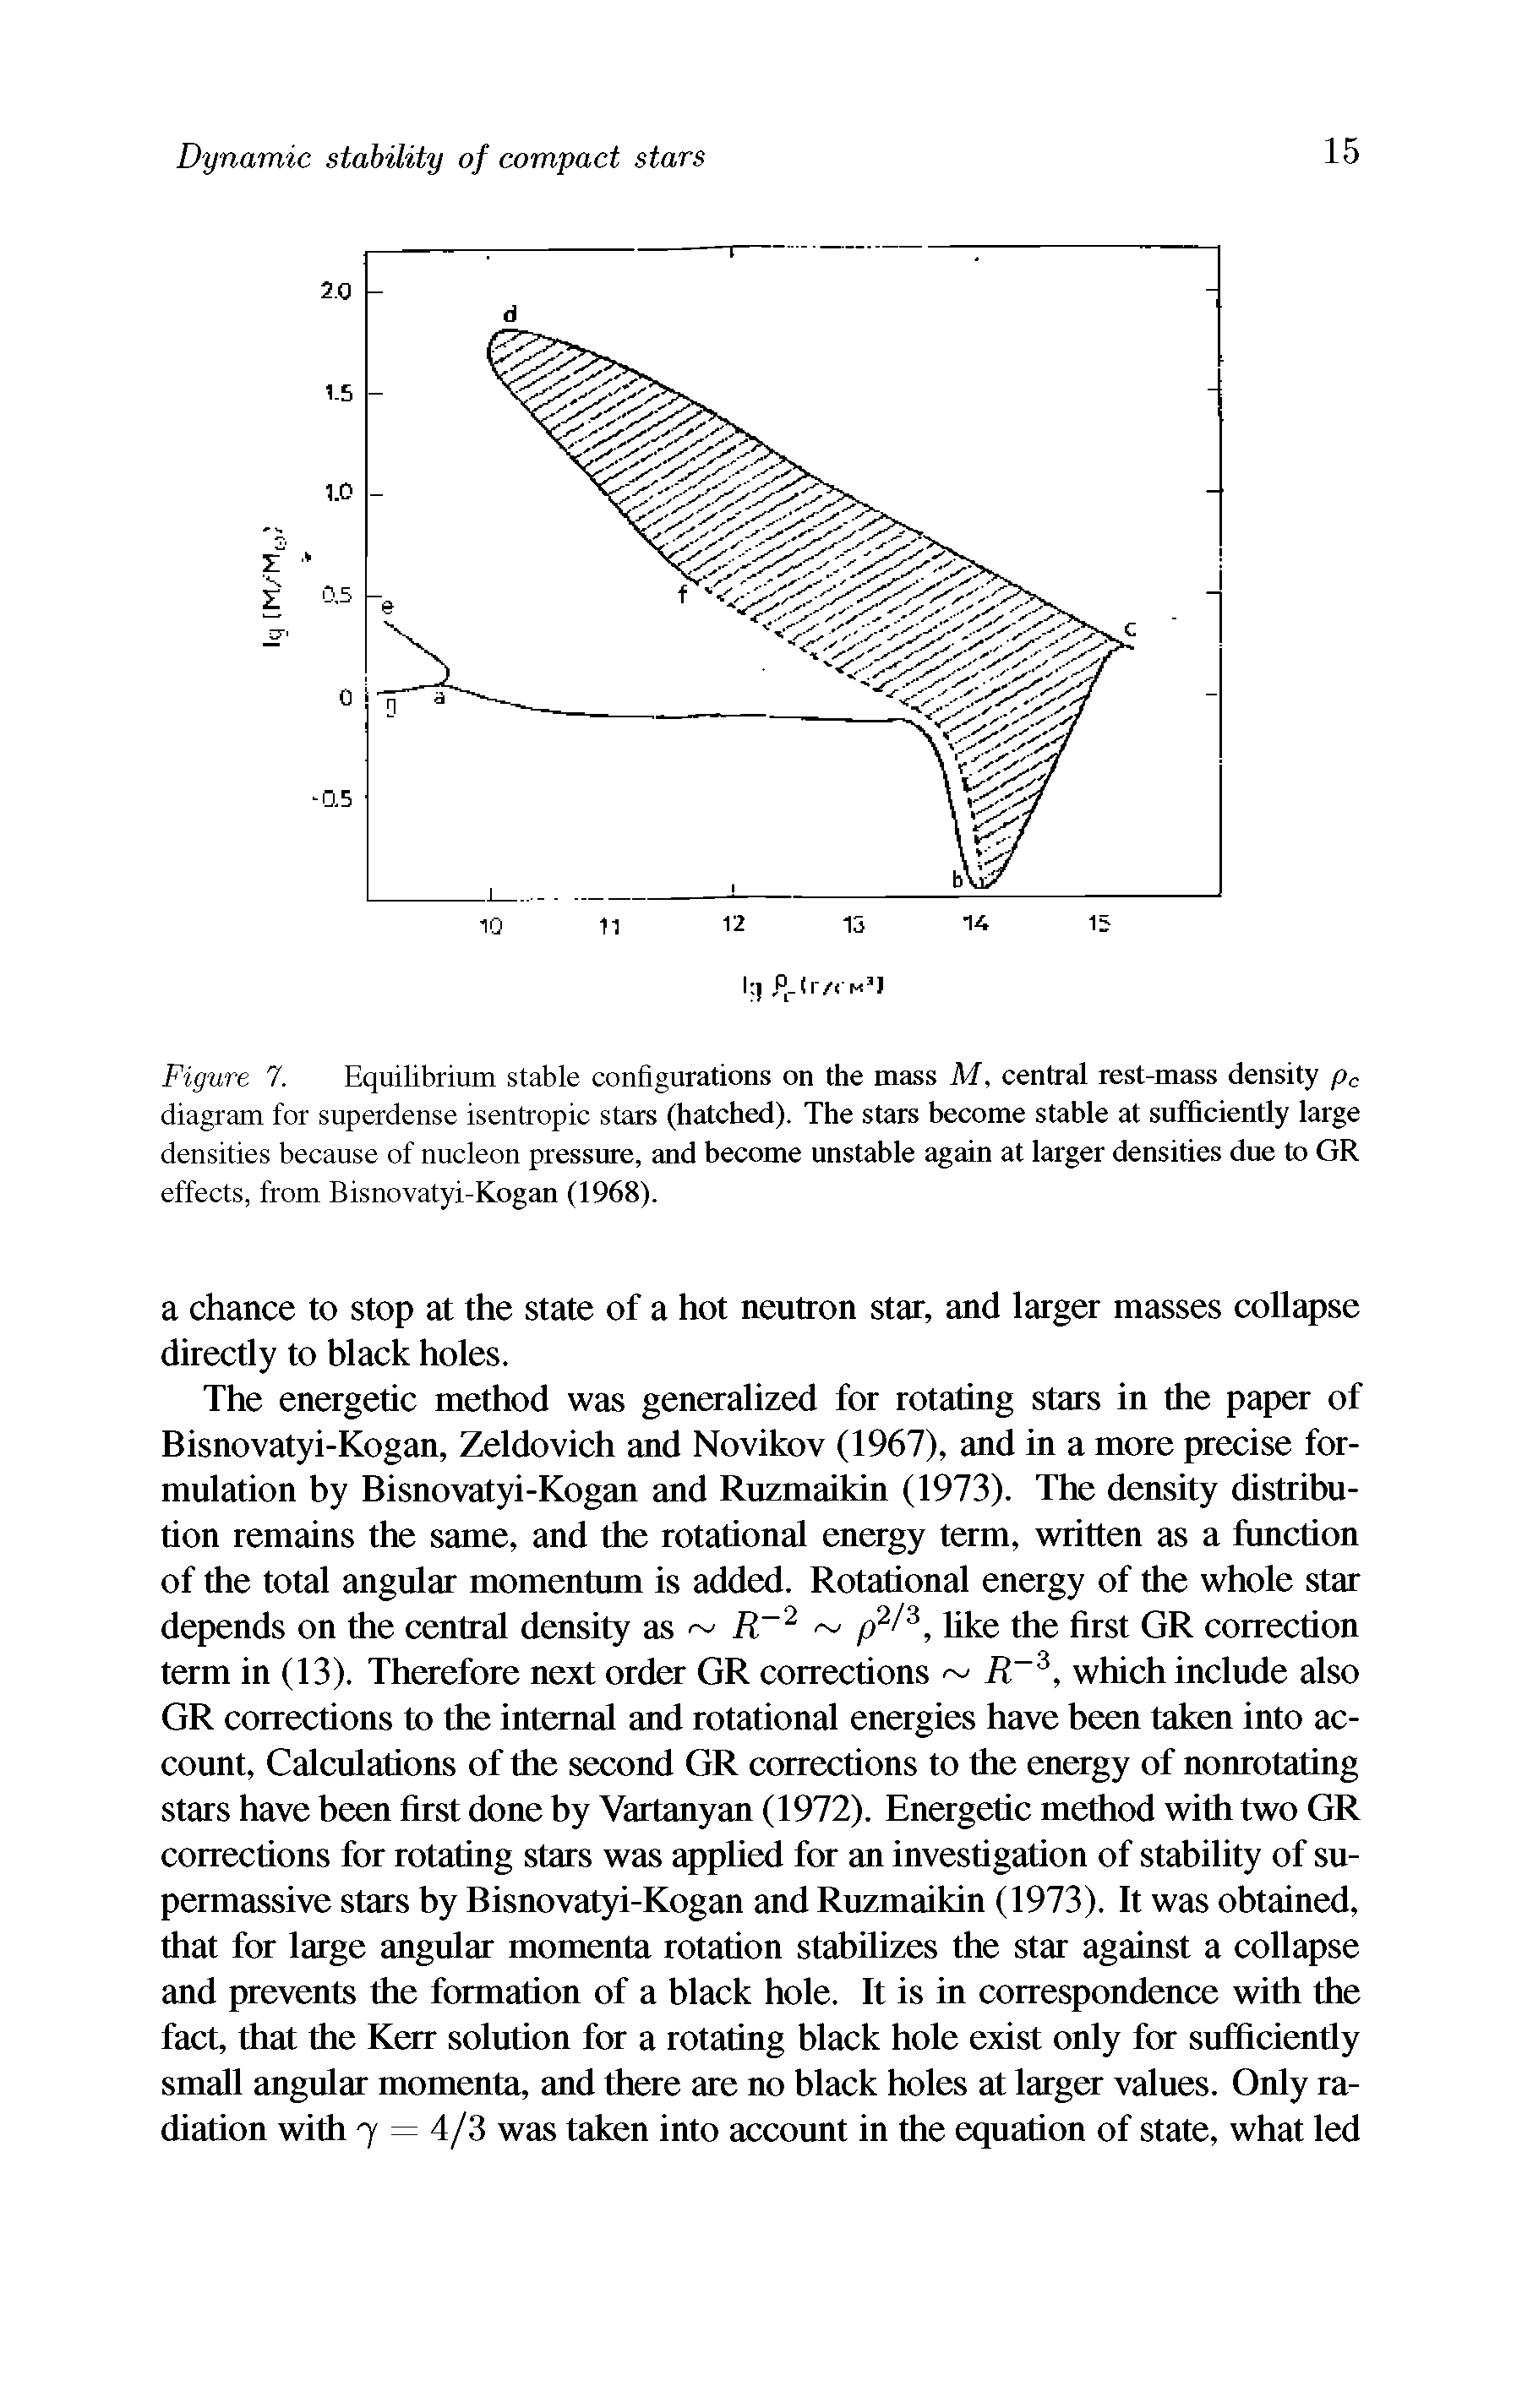 Figure 7. Equilibrium stable configurations on the mass M, central rest-mass density pc diagram for superdense isentropic stars (hatched). The stars become stable at sufficiently large densities because of nucleon pressure, and become unstable again at larger densities due to GR effects, from Bisnovatyi-Kogan (1968).